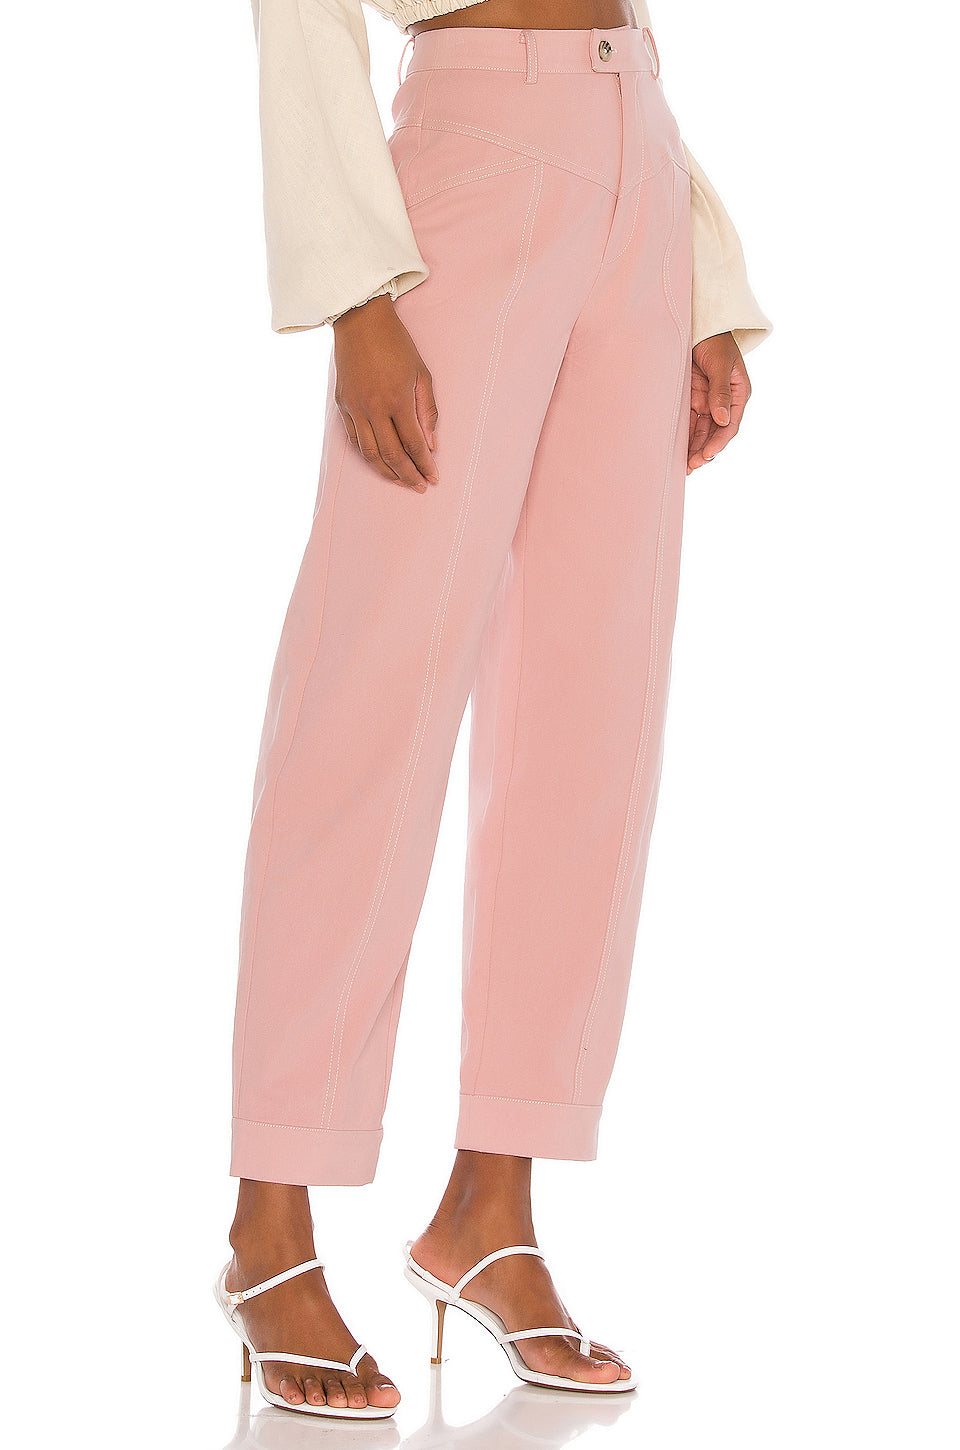 Austin Pant in SOFT PINK